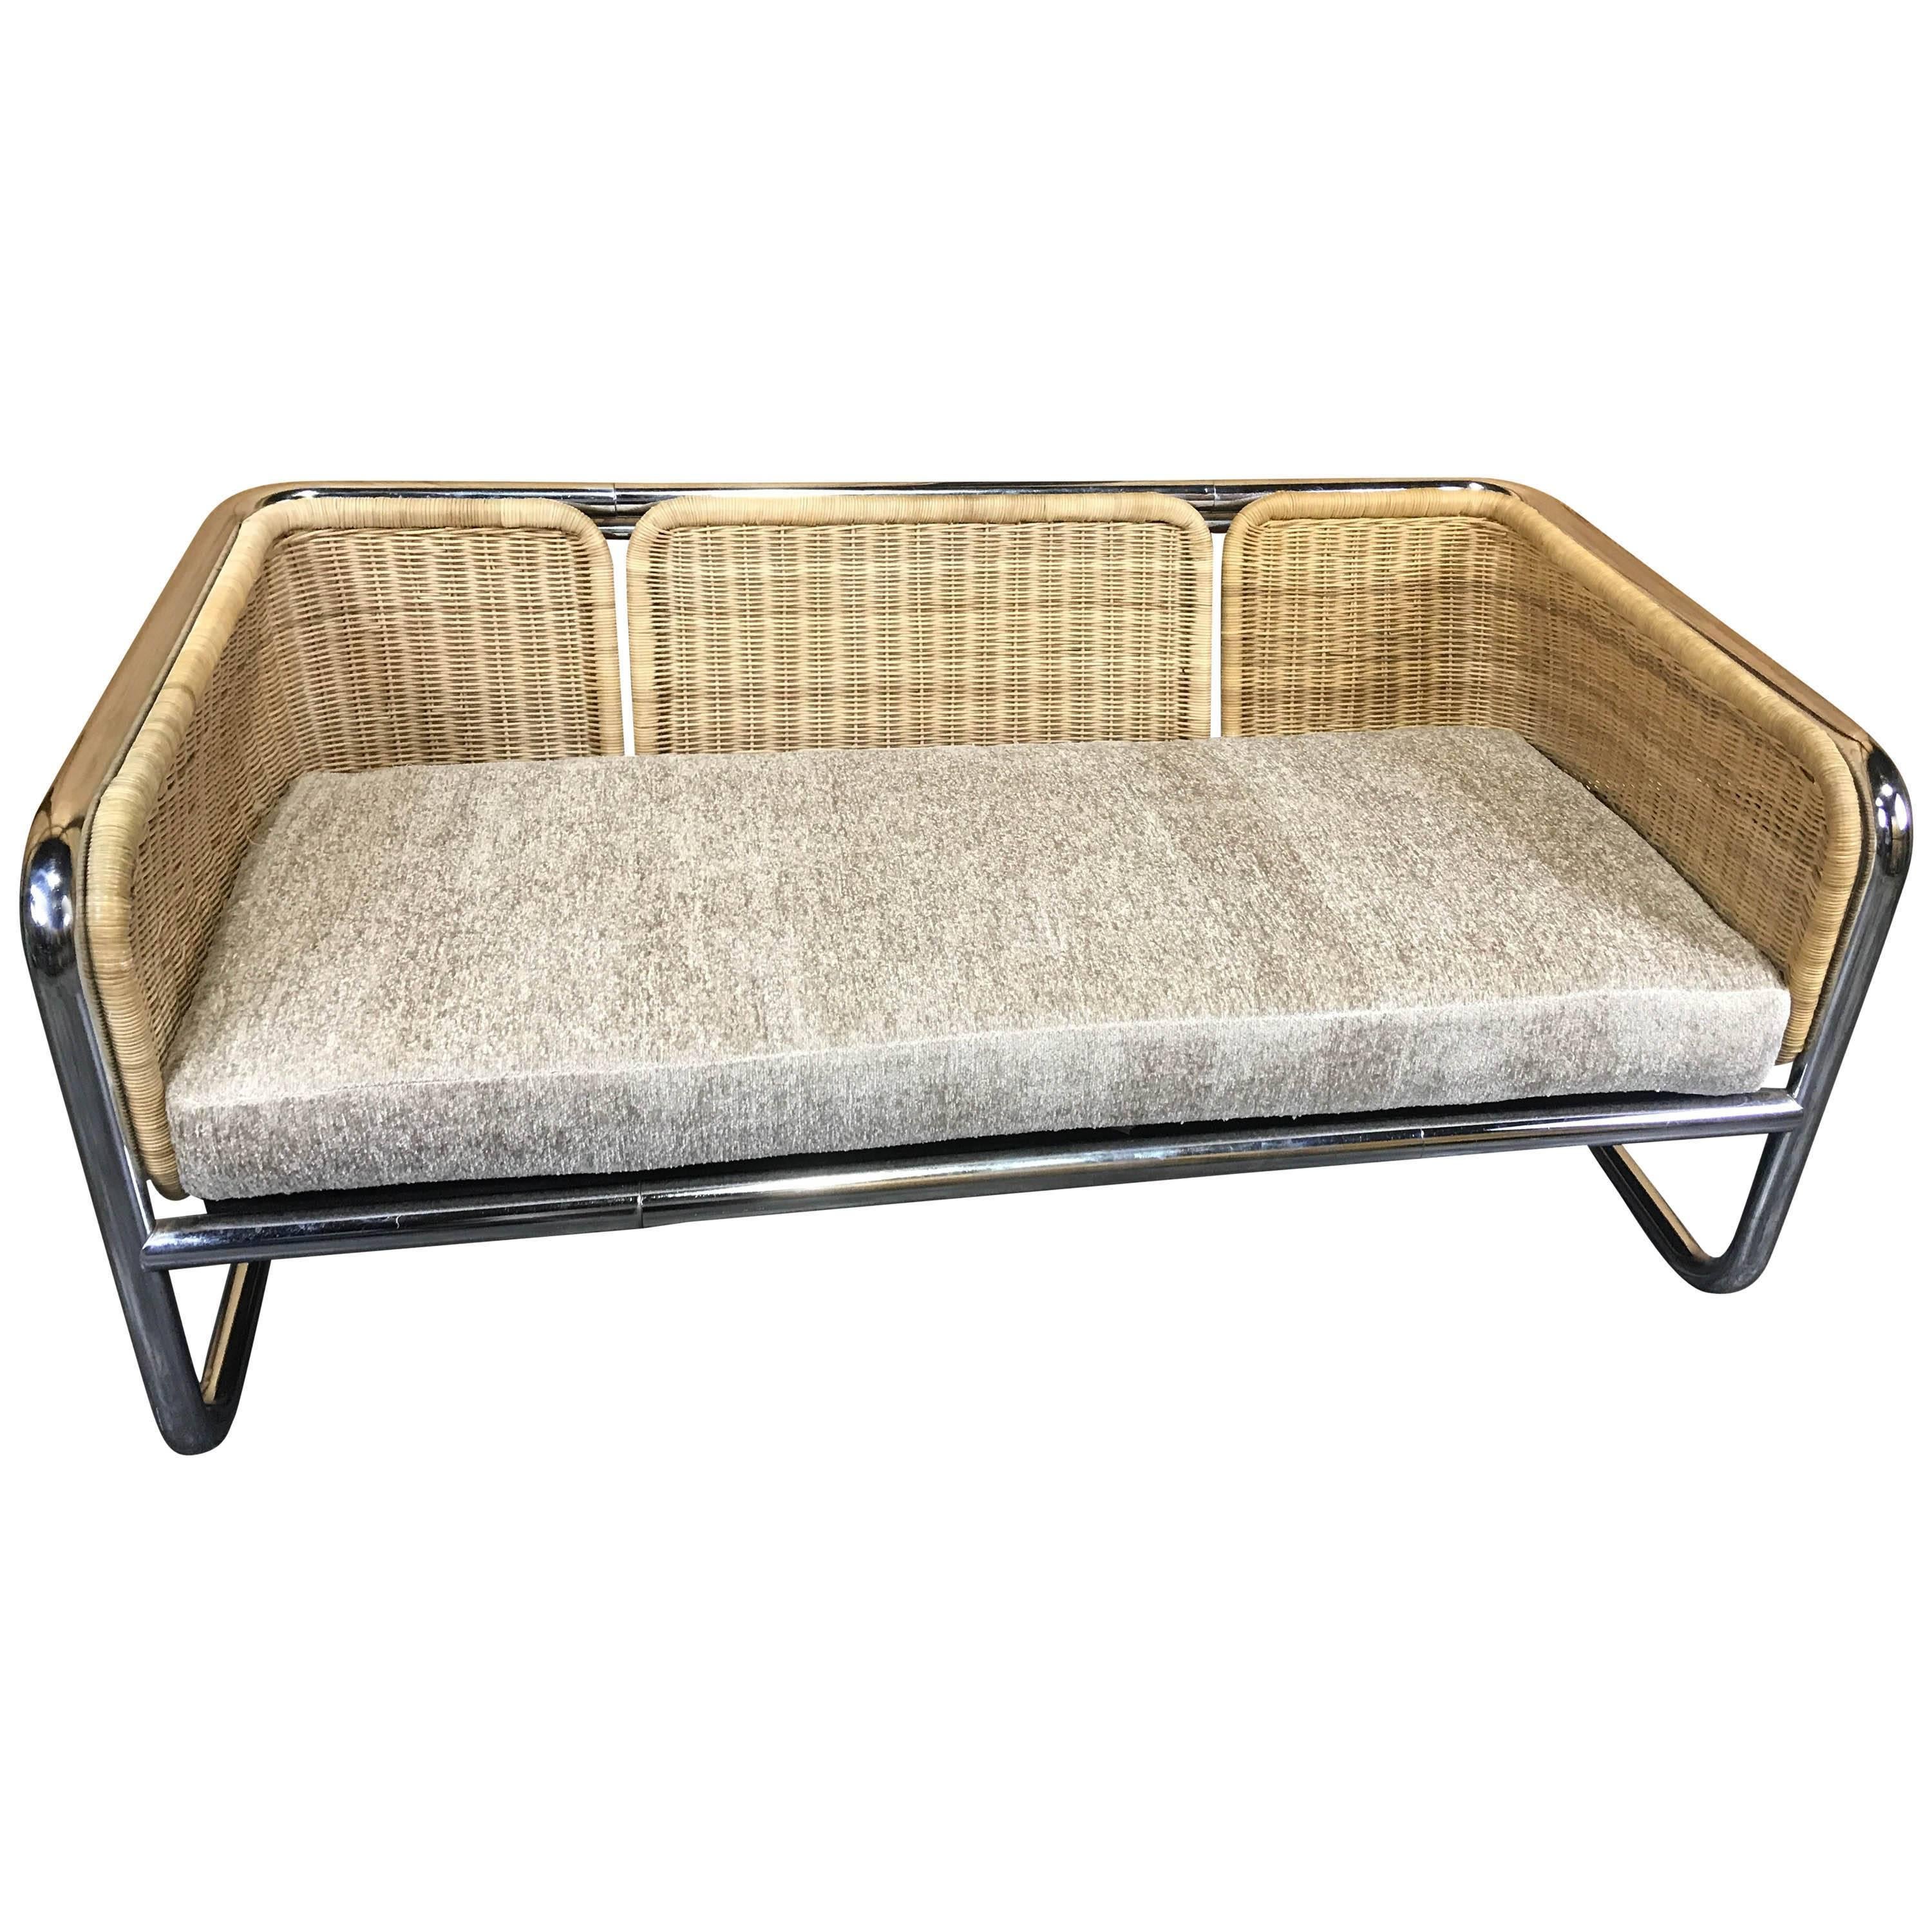 Martin Visser wicker and chrome cantilever couch, with bright and shiny chrome, strong wicker bucket seat with newly upholstered seat and seat cushions.
The sofa measures 27